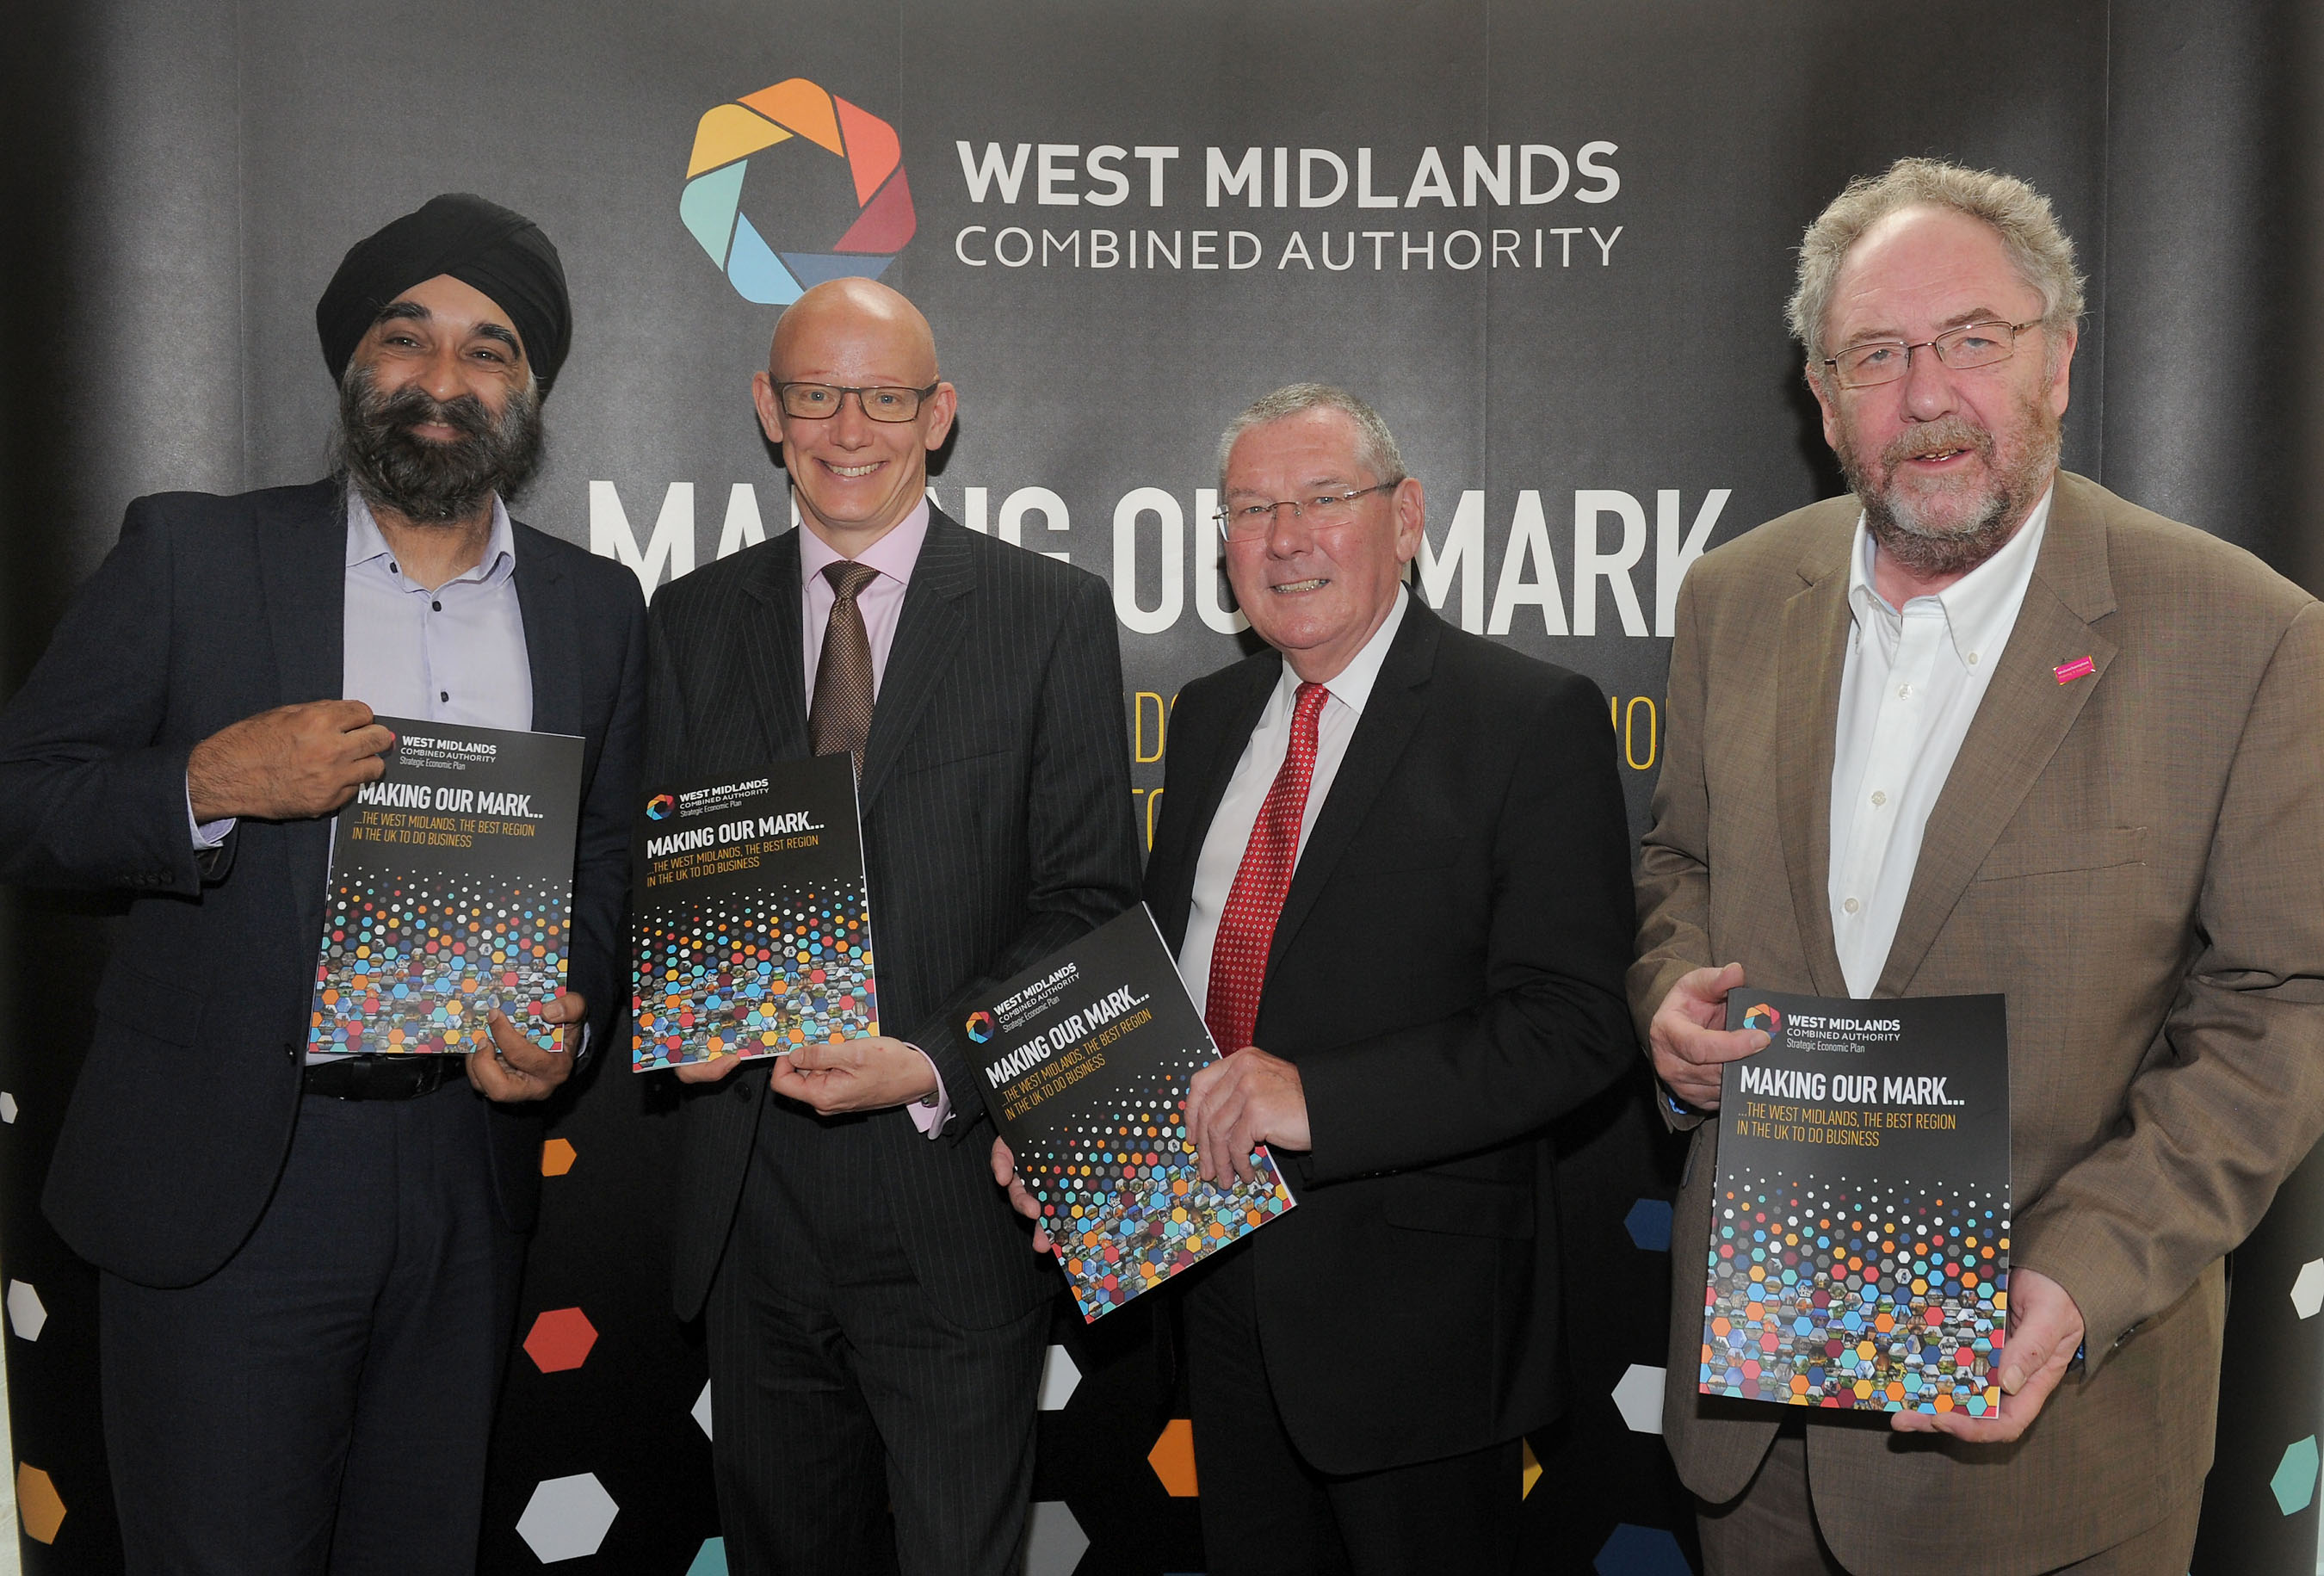 The West Midlands Combined Authority’s Strategic Economic Plan (SEP), launched today, is the blueprint for the region making its mark regionally, nationally and internationally.